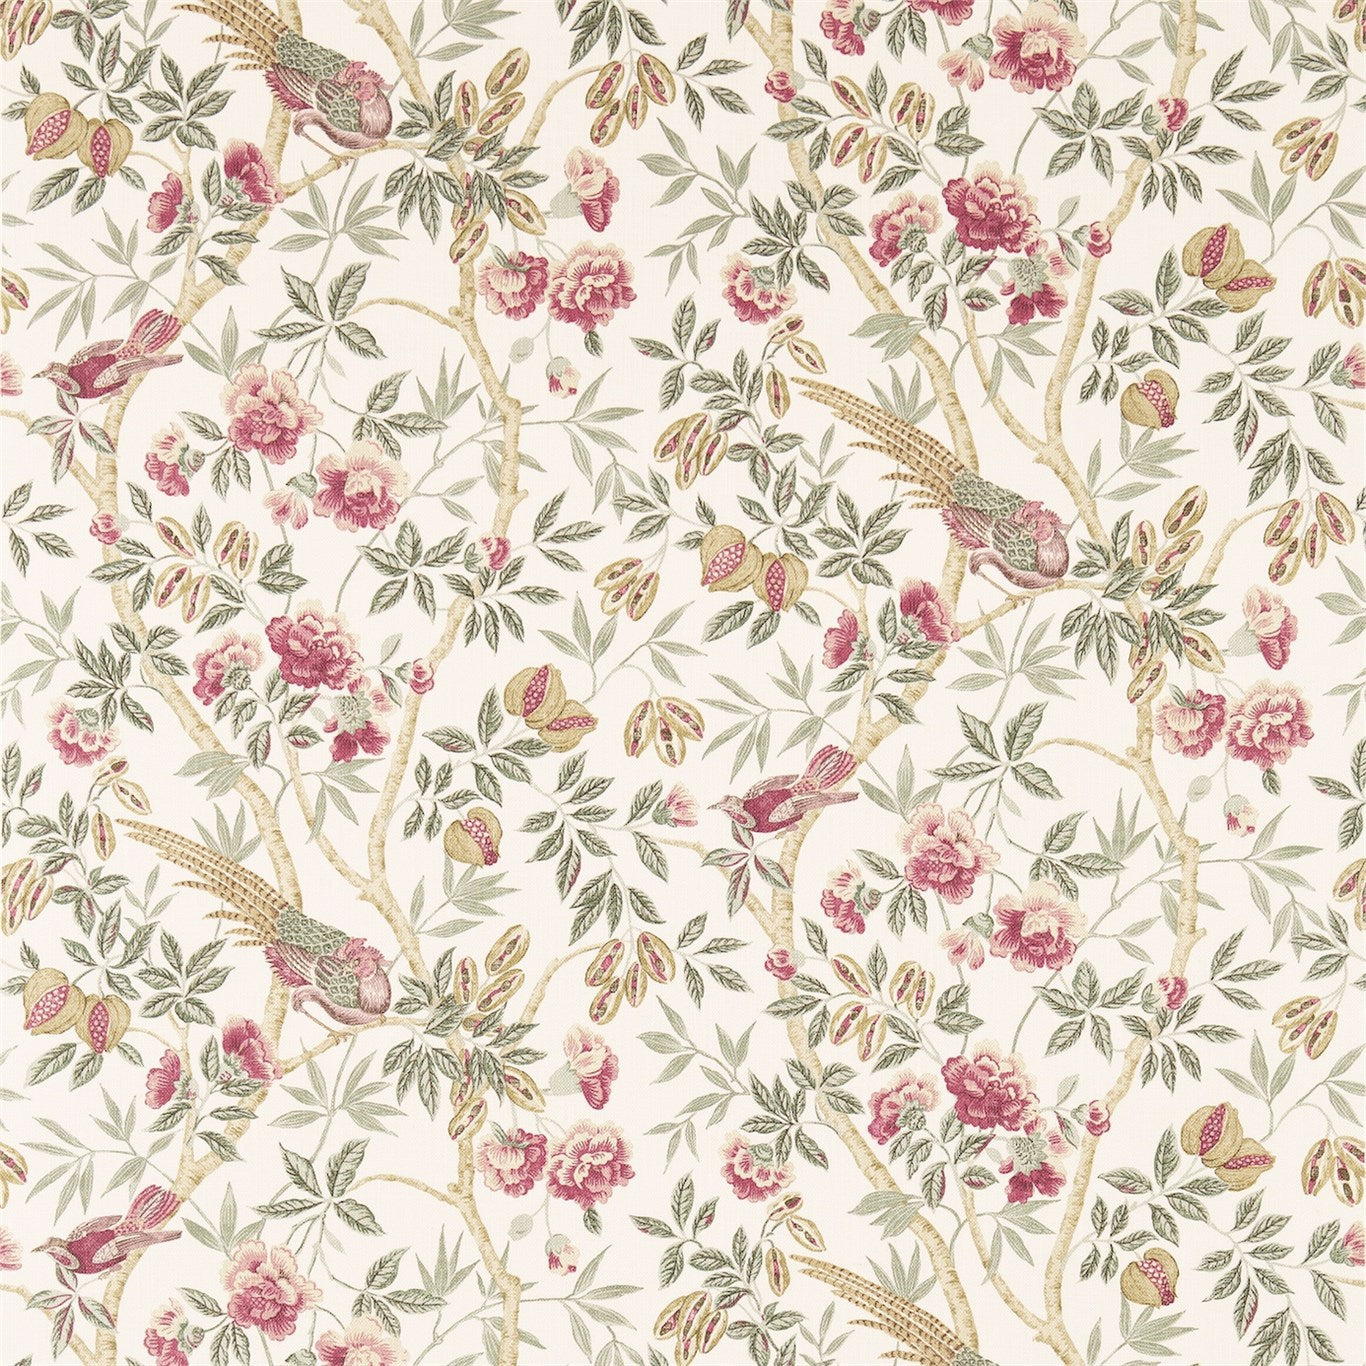 Abbeville Fabric by Sanderson - DFAB223968 - Rose/Calico